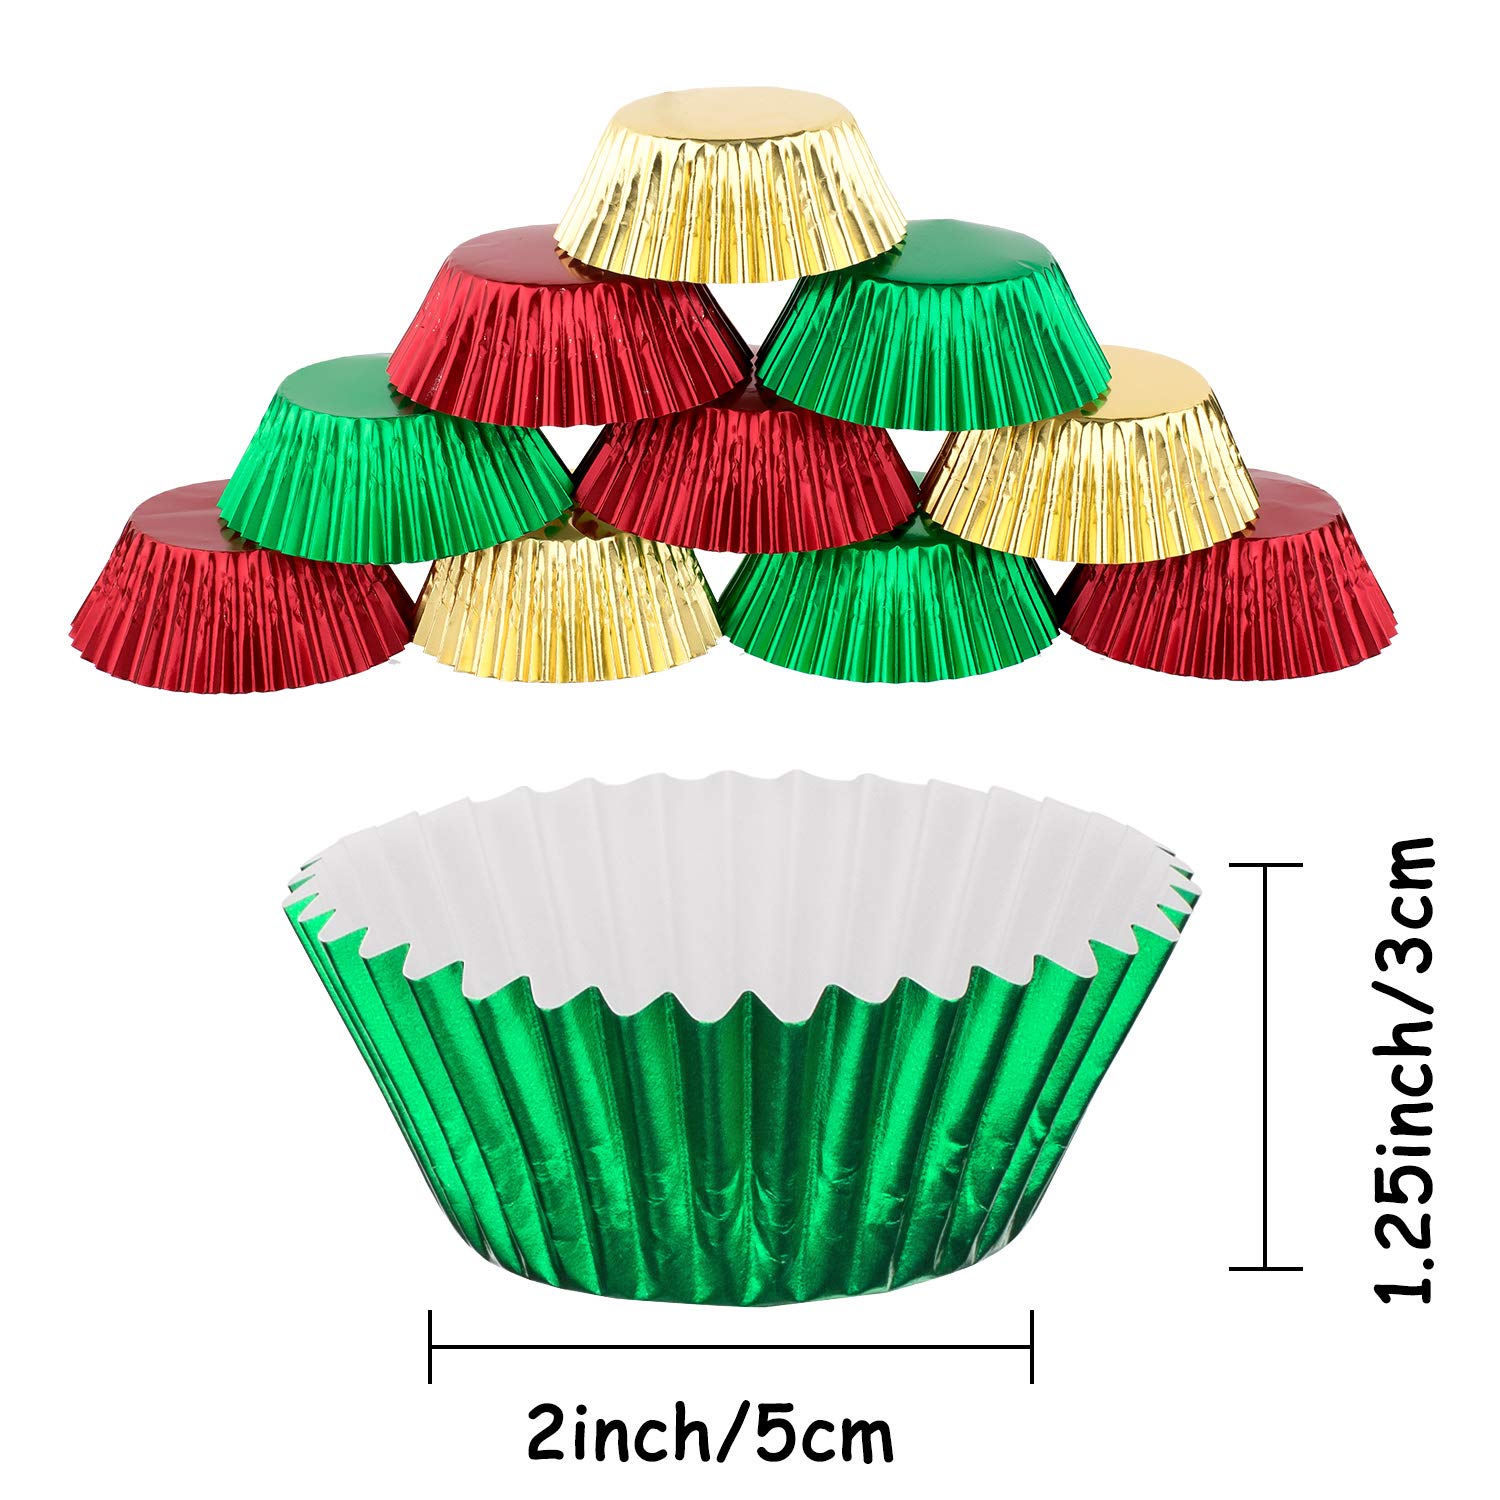 Whaline 300Pcs Foil Metallic Cupcake Liner Baking Cups, Muffin Tins Treat Cups Foil Metallic Cupcake Liners for Christmas Party, Weddings, Birthdays, Baby Showers, Standard Size (Red, Green, Gold)